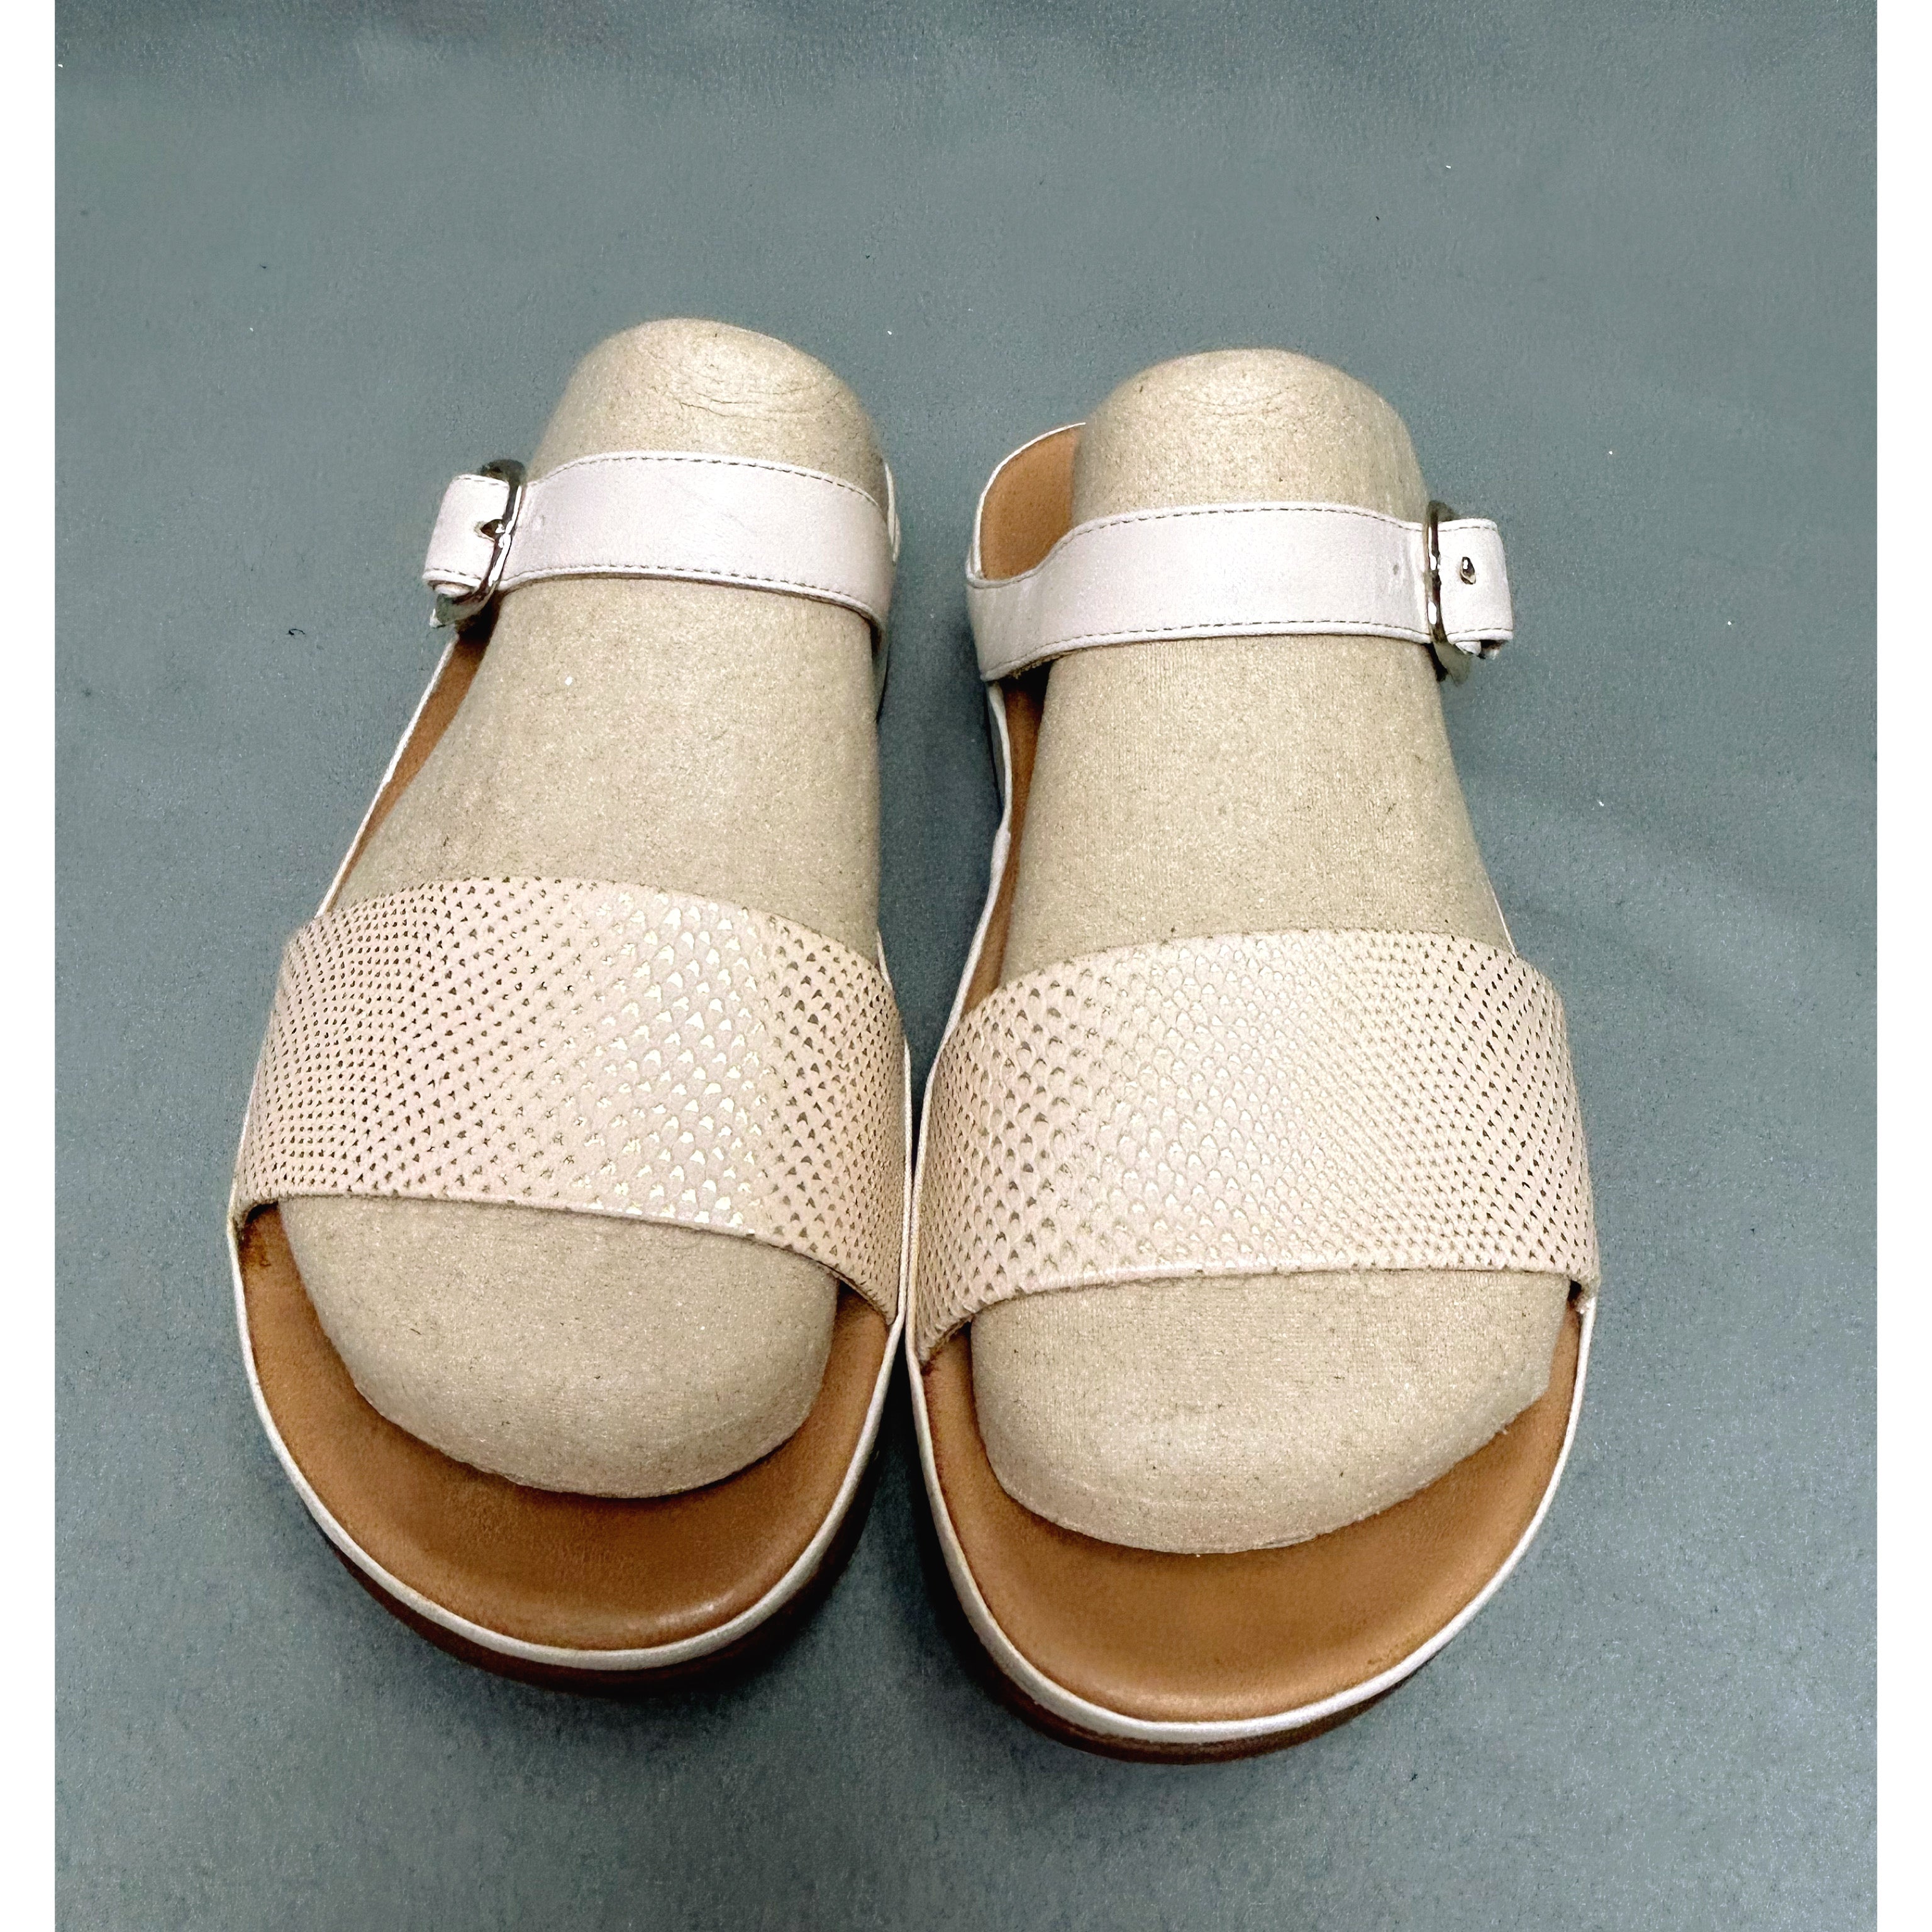 Fit Flop tan leather sandals, size 8, NEW!